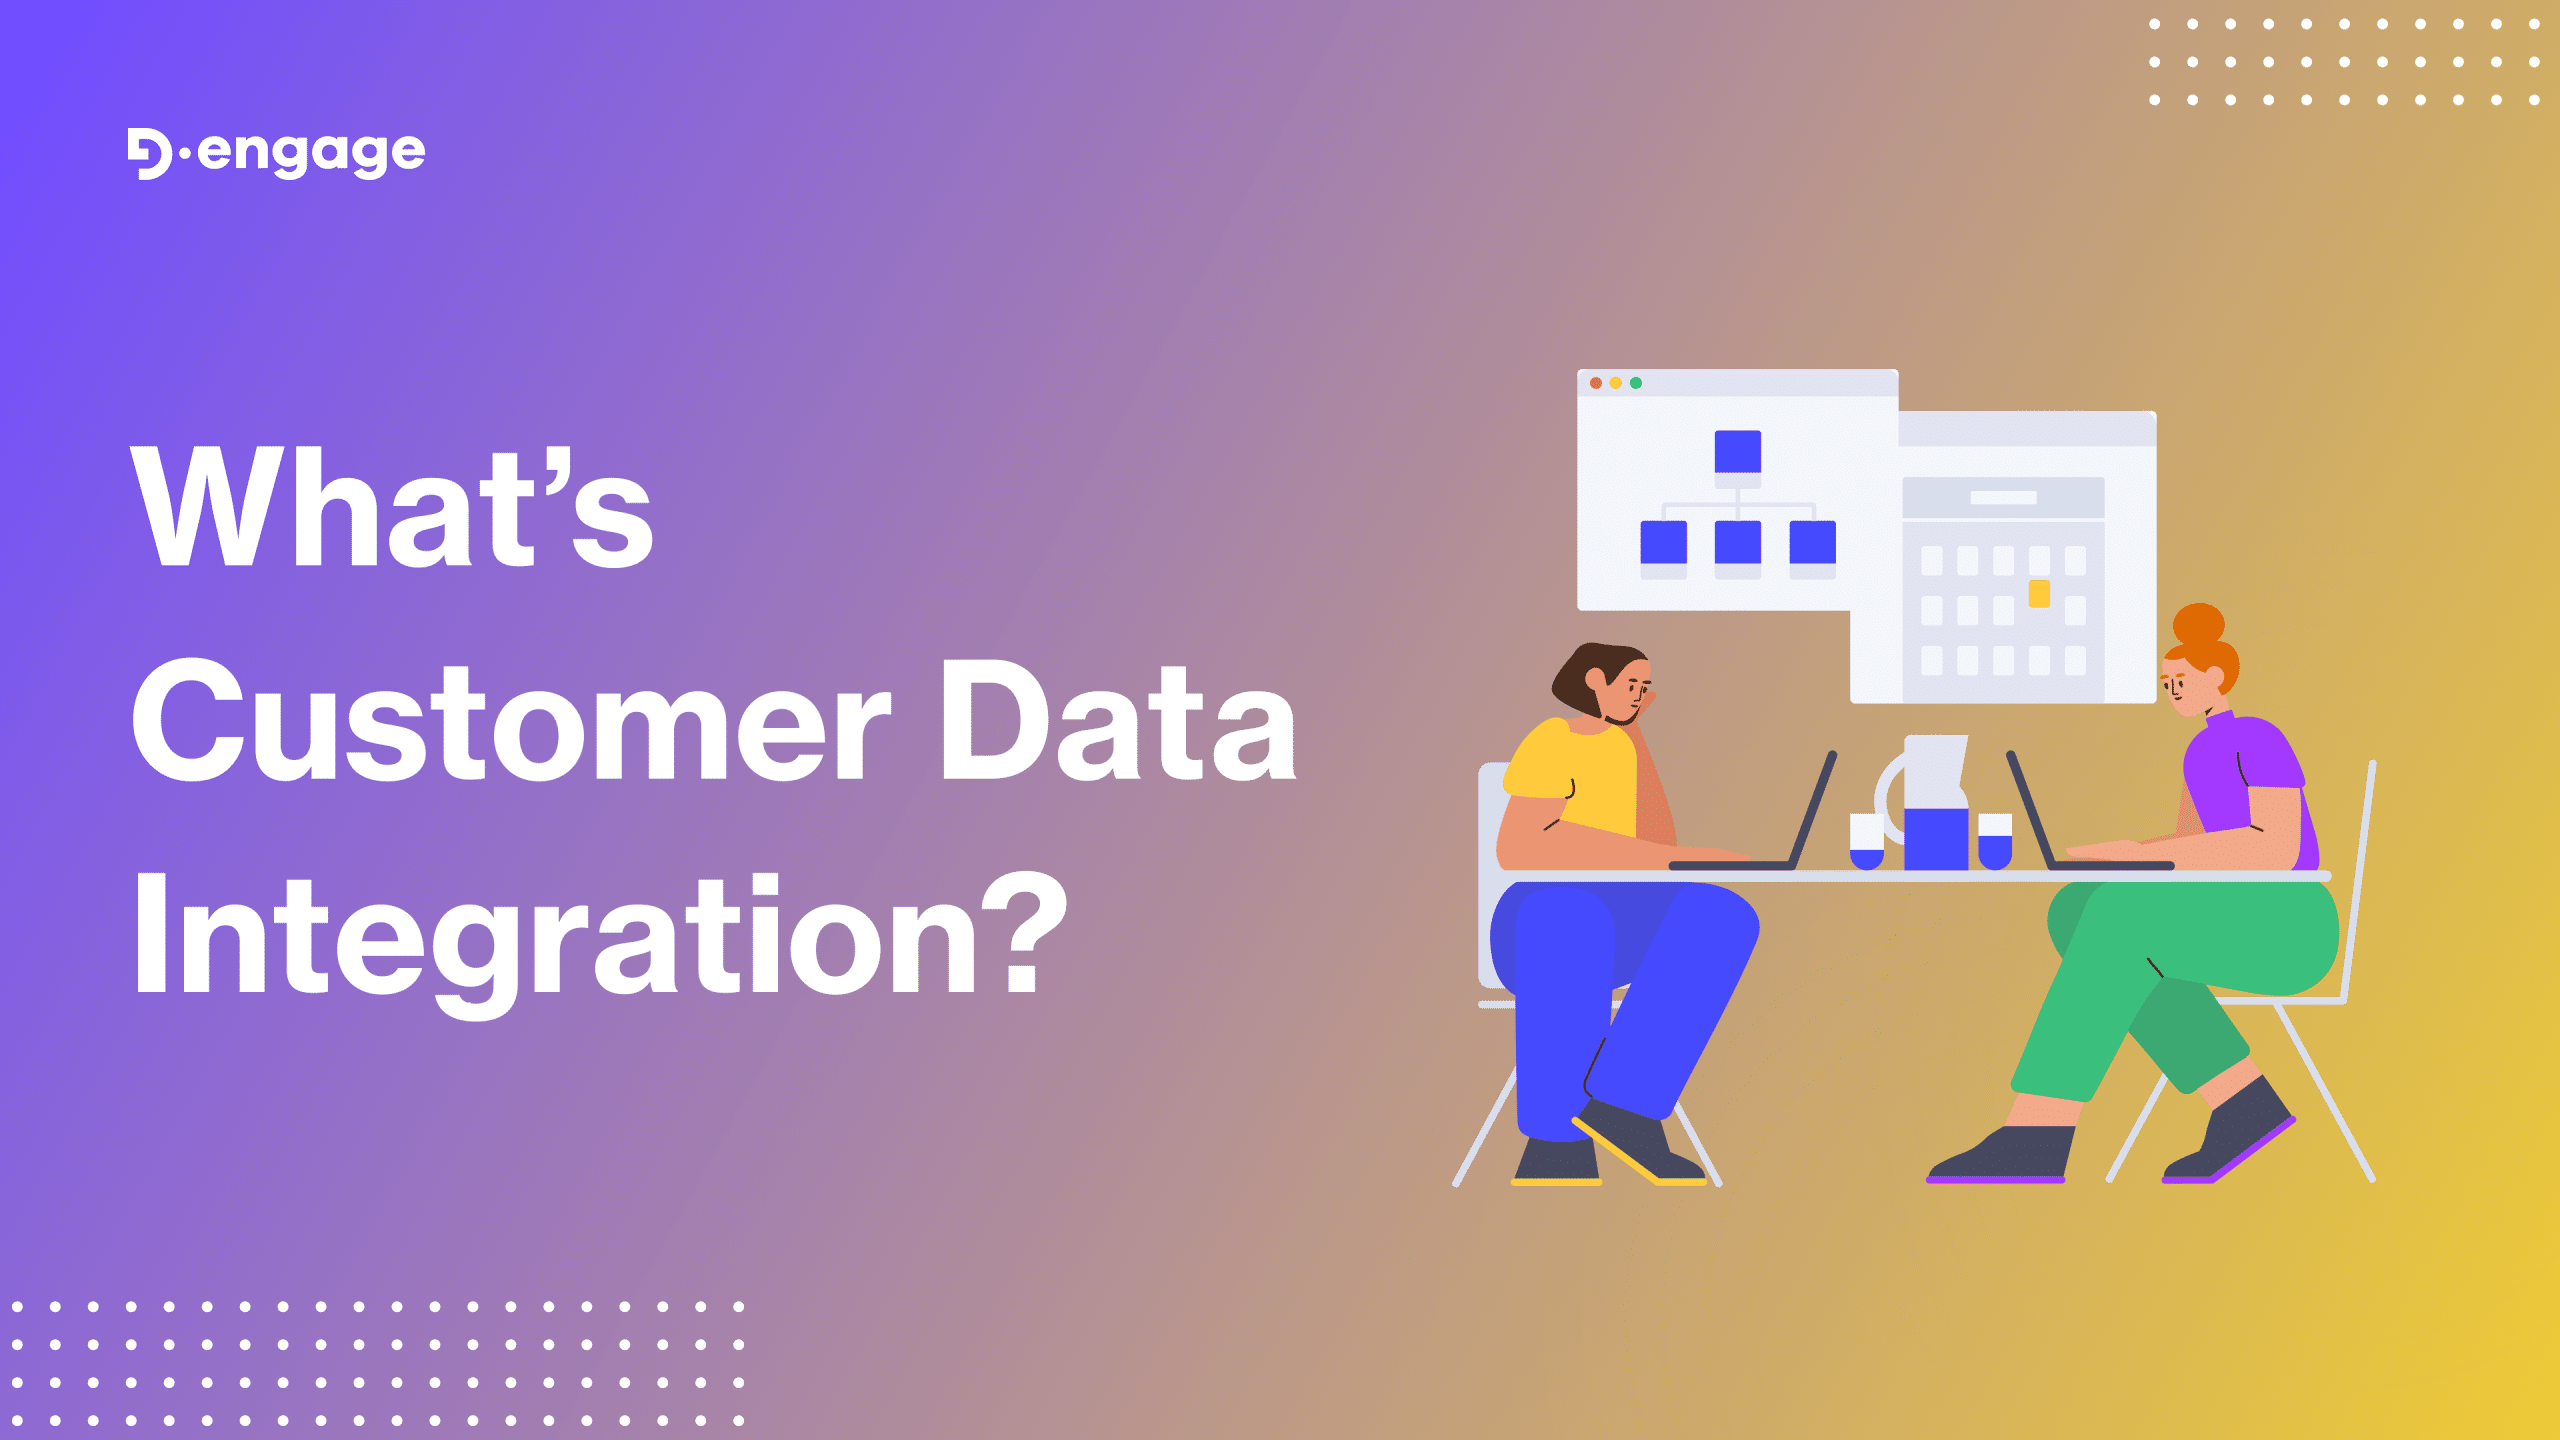 What is Customer Data Integration?